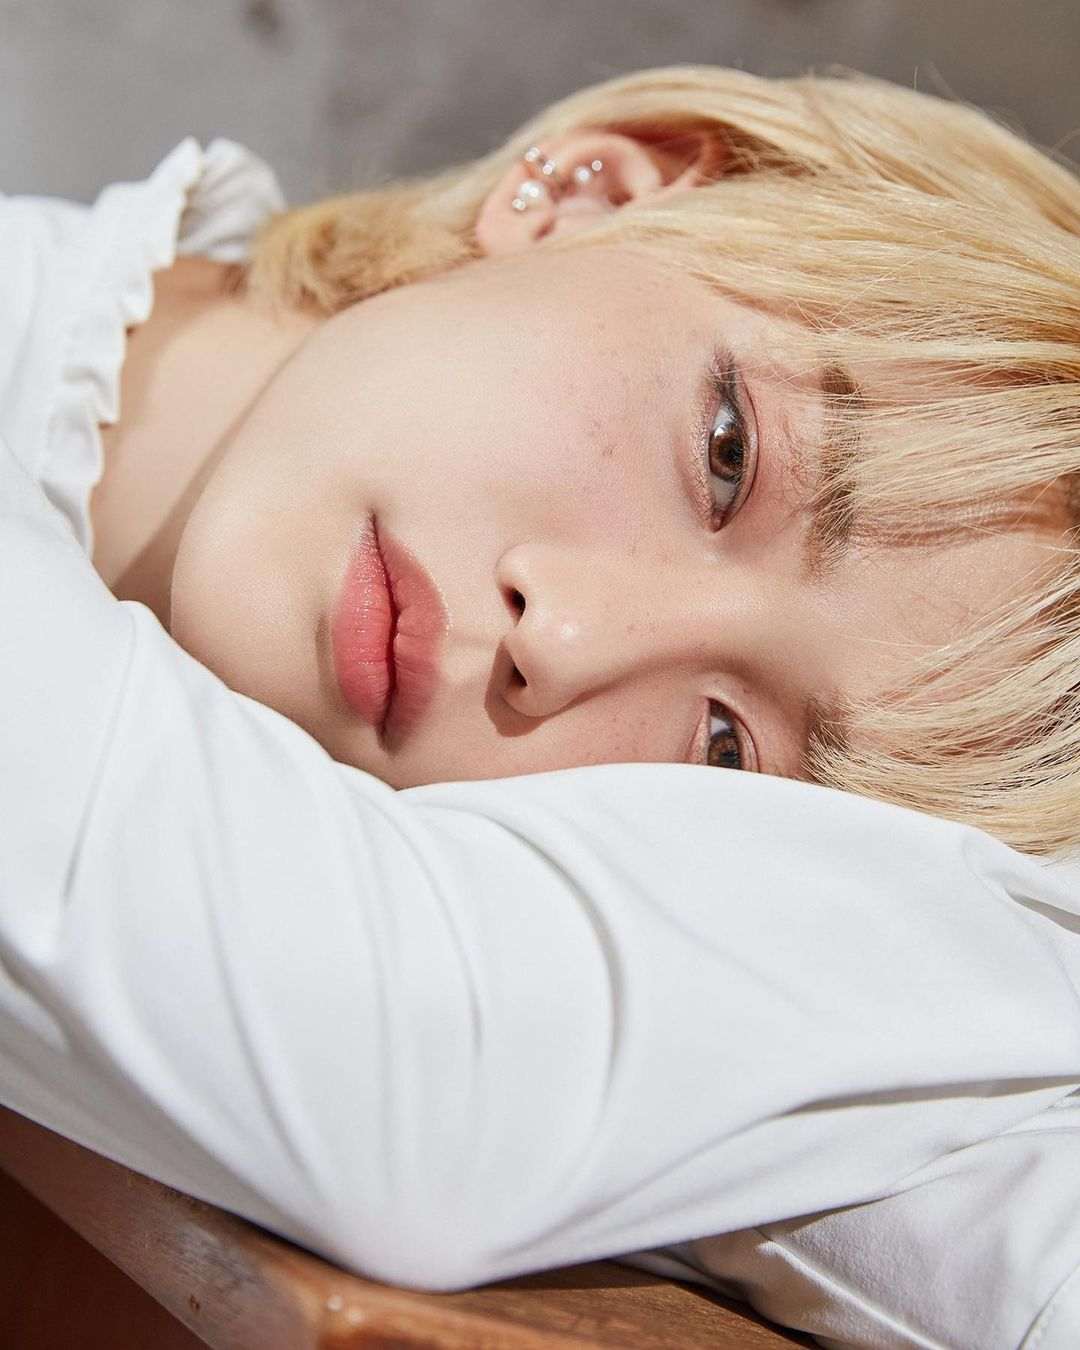 Felix Stray Kids - Biography, Profile, Facts, and Career